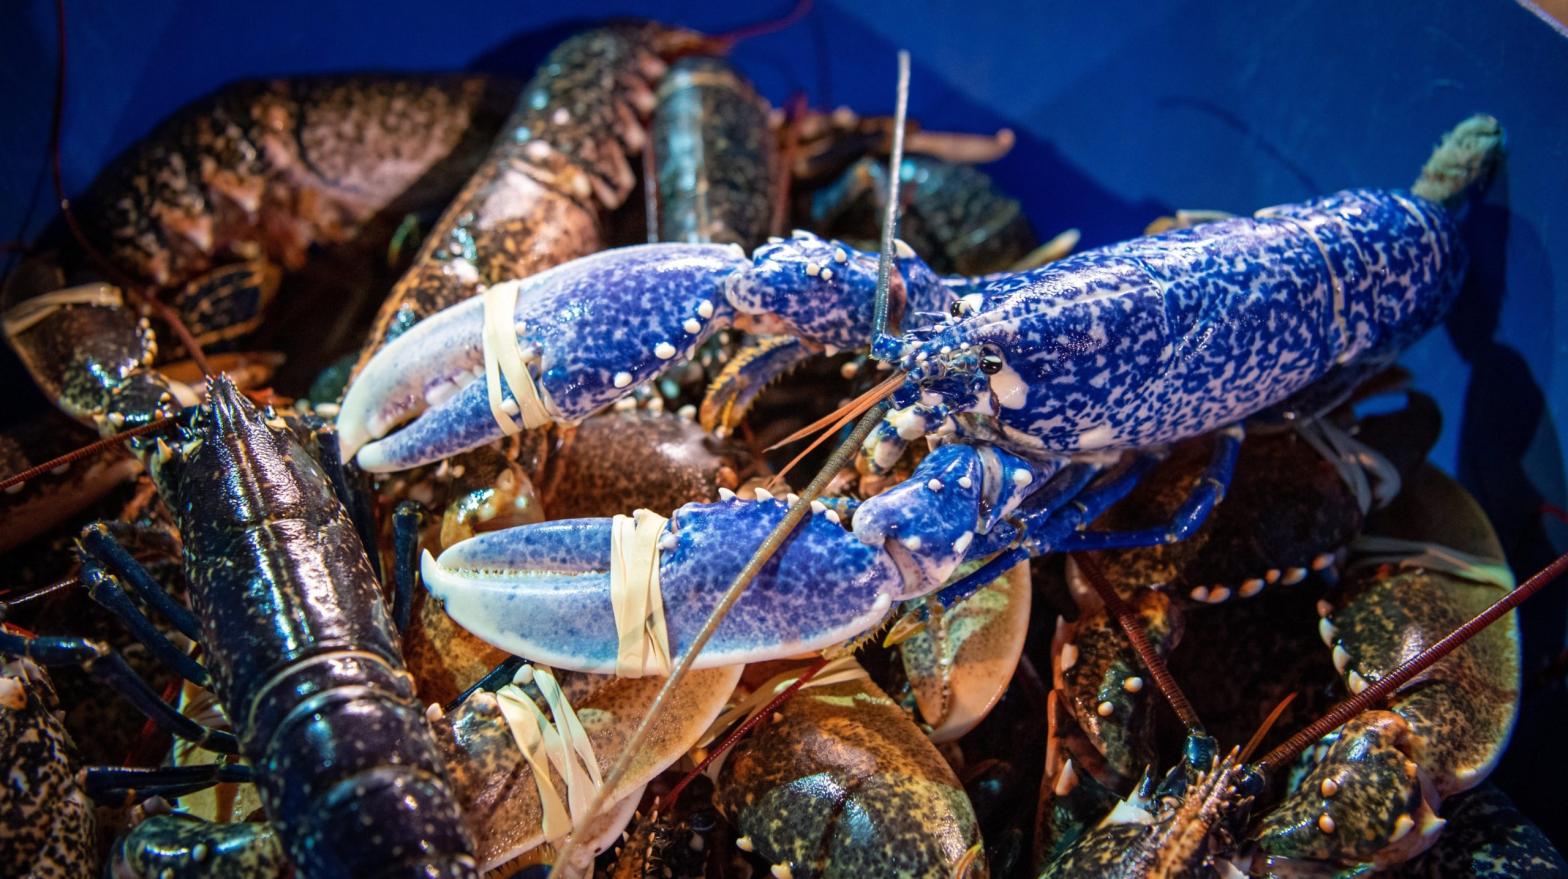 A blue lobster in Weymouth, England. (Photo: Finnbarr Webster, Getty Images)